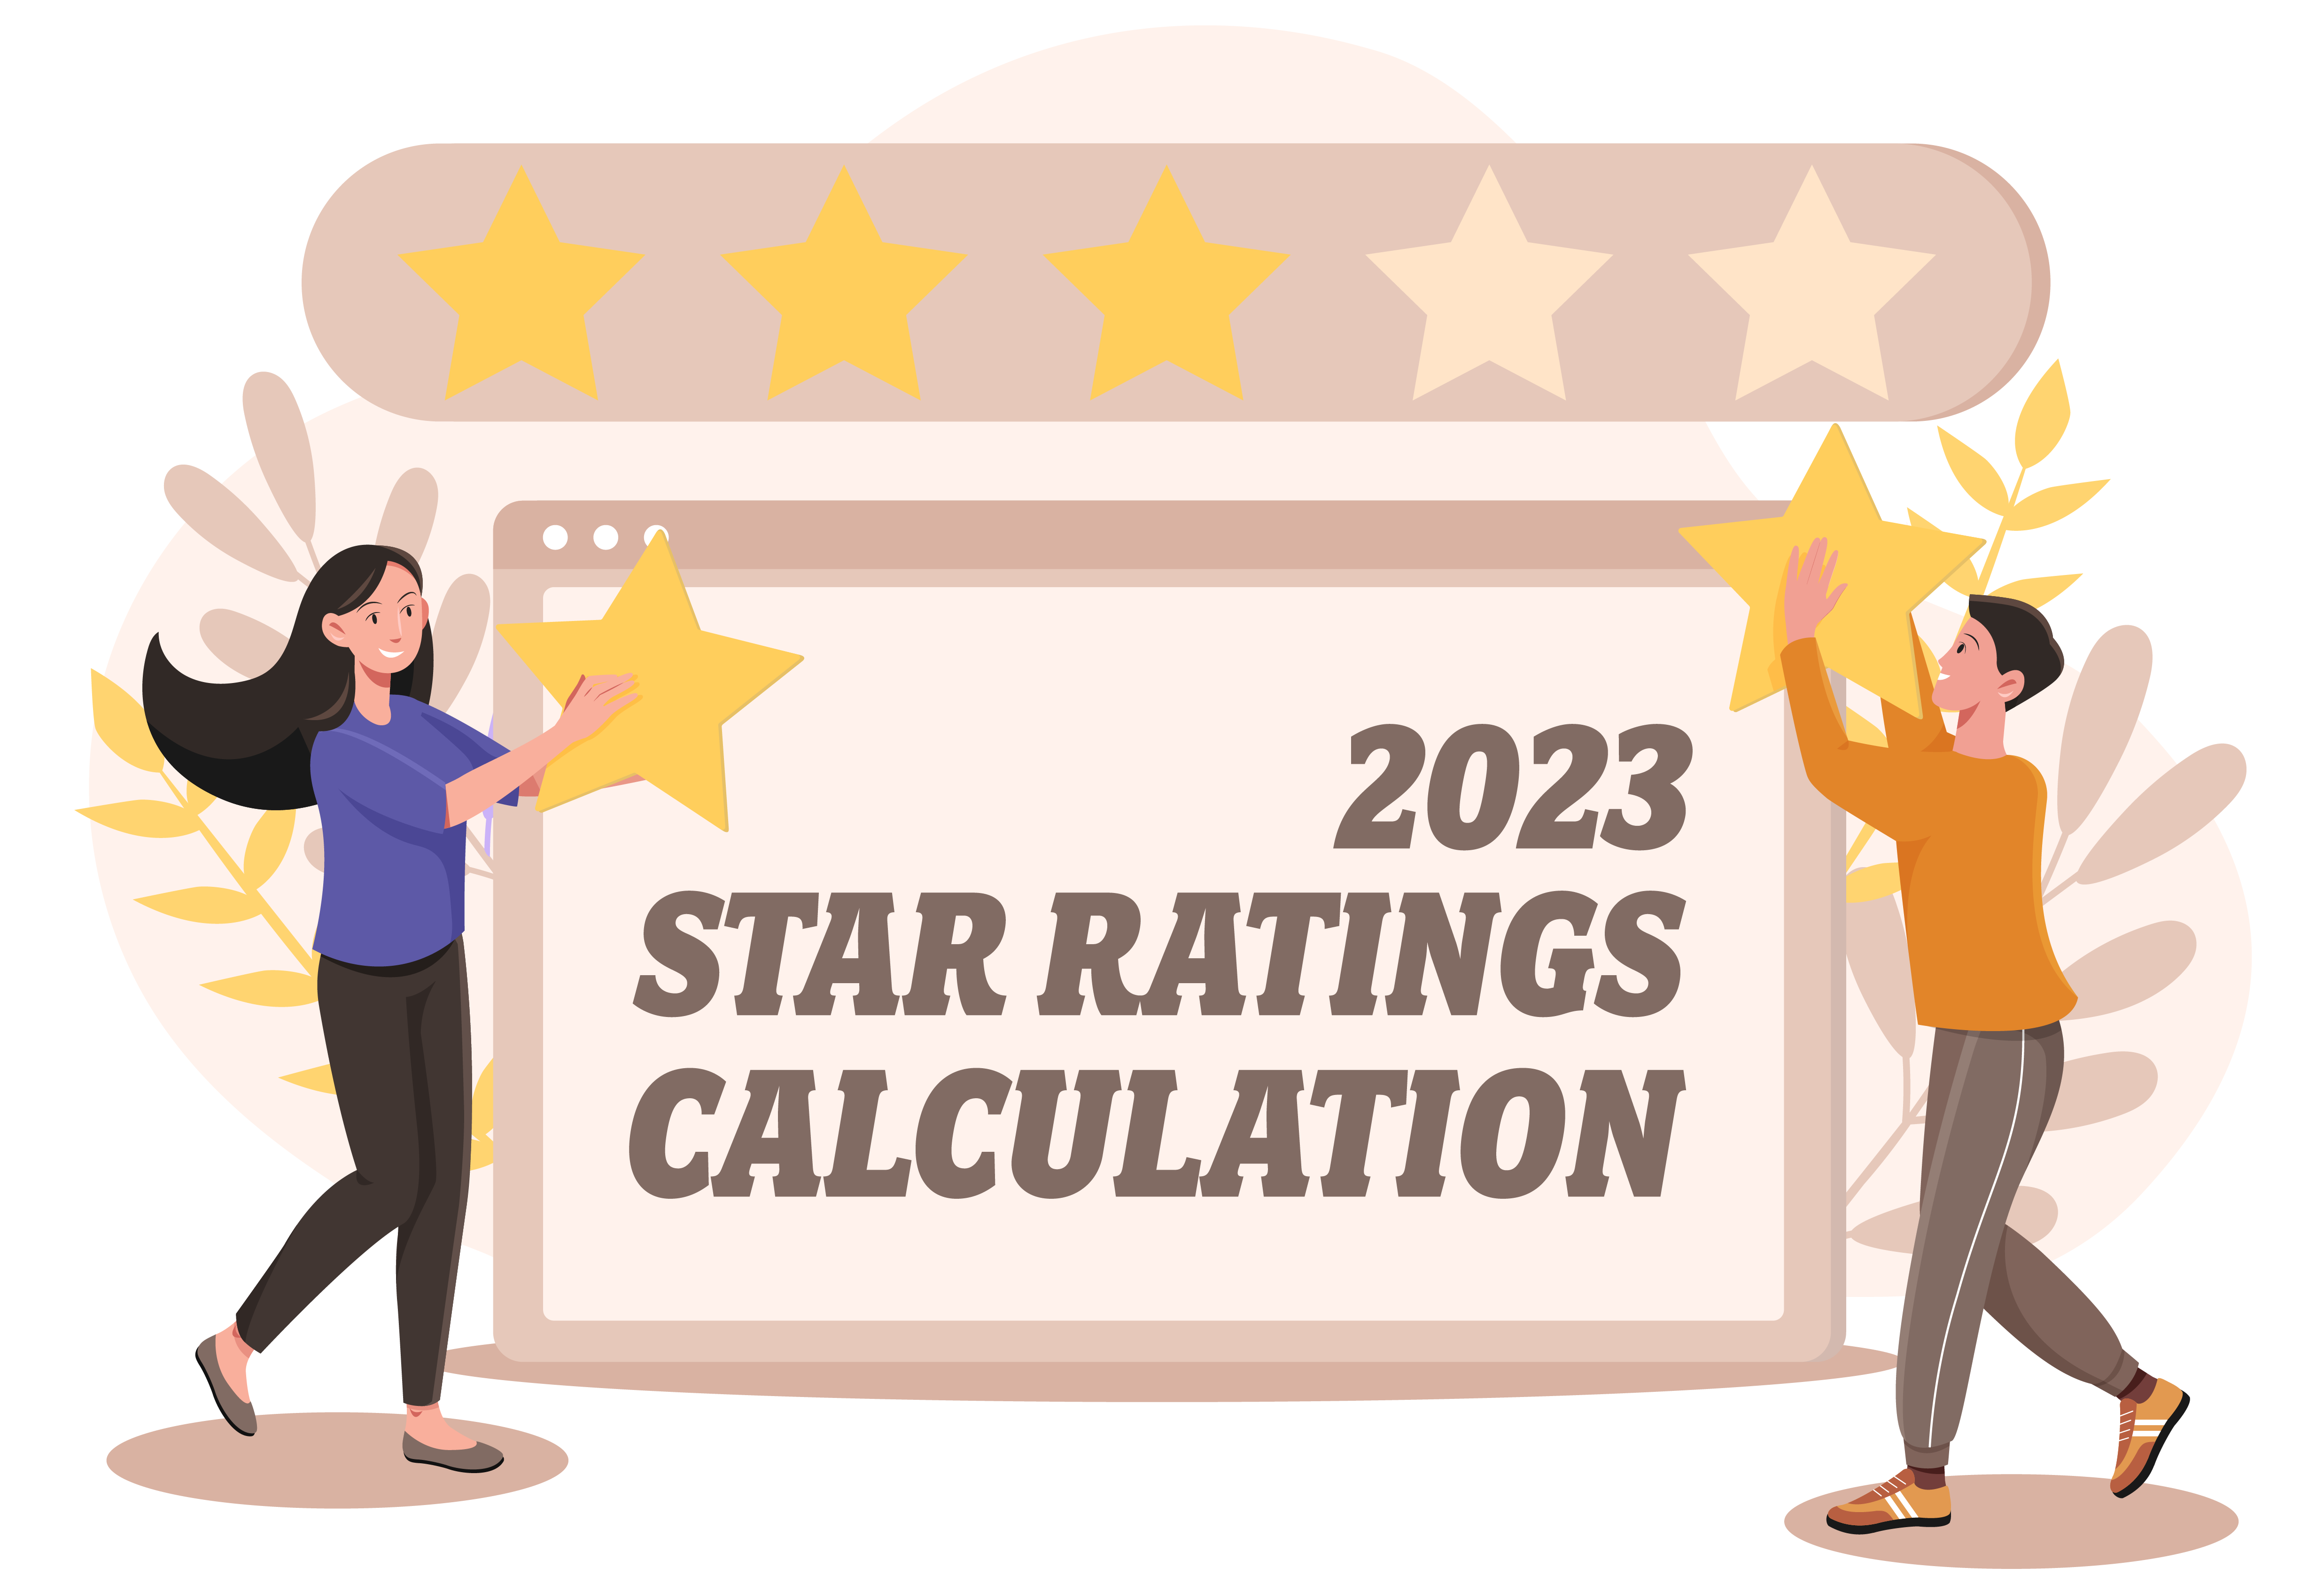 2023 Star Ratings Calculation